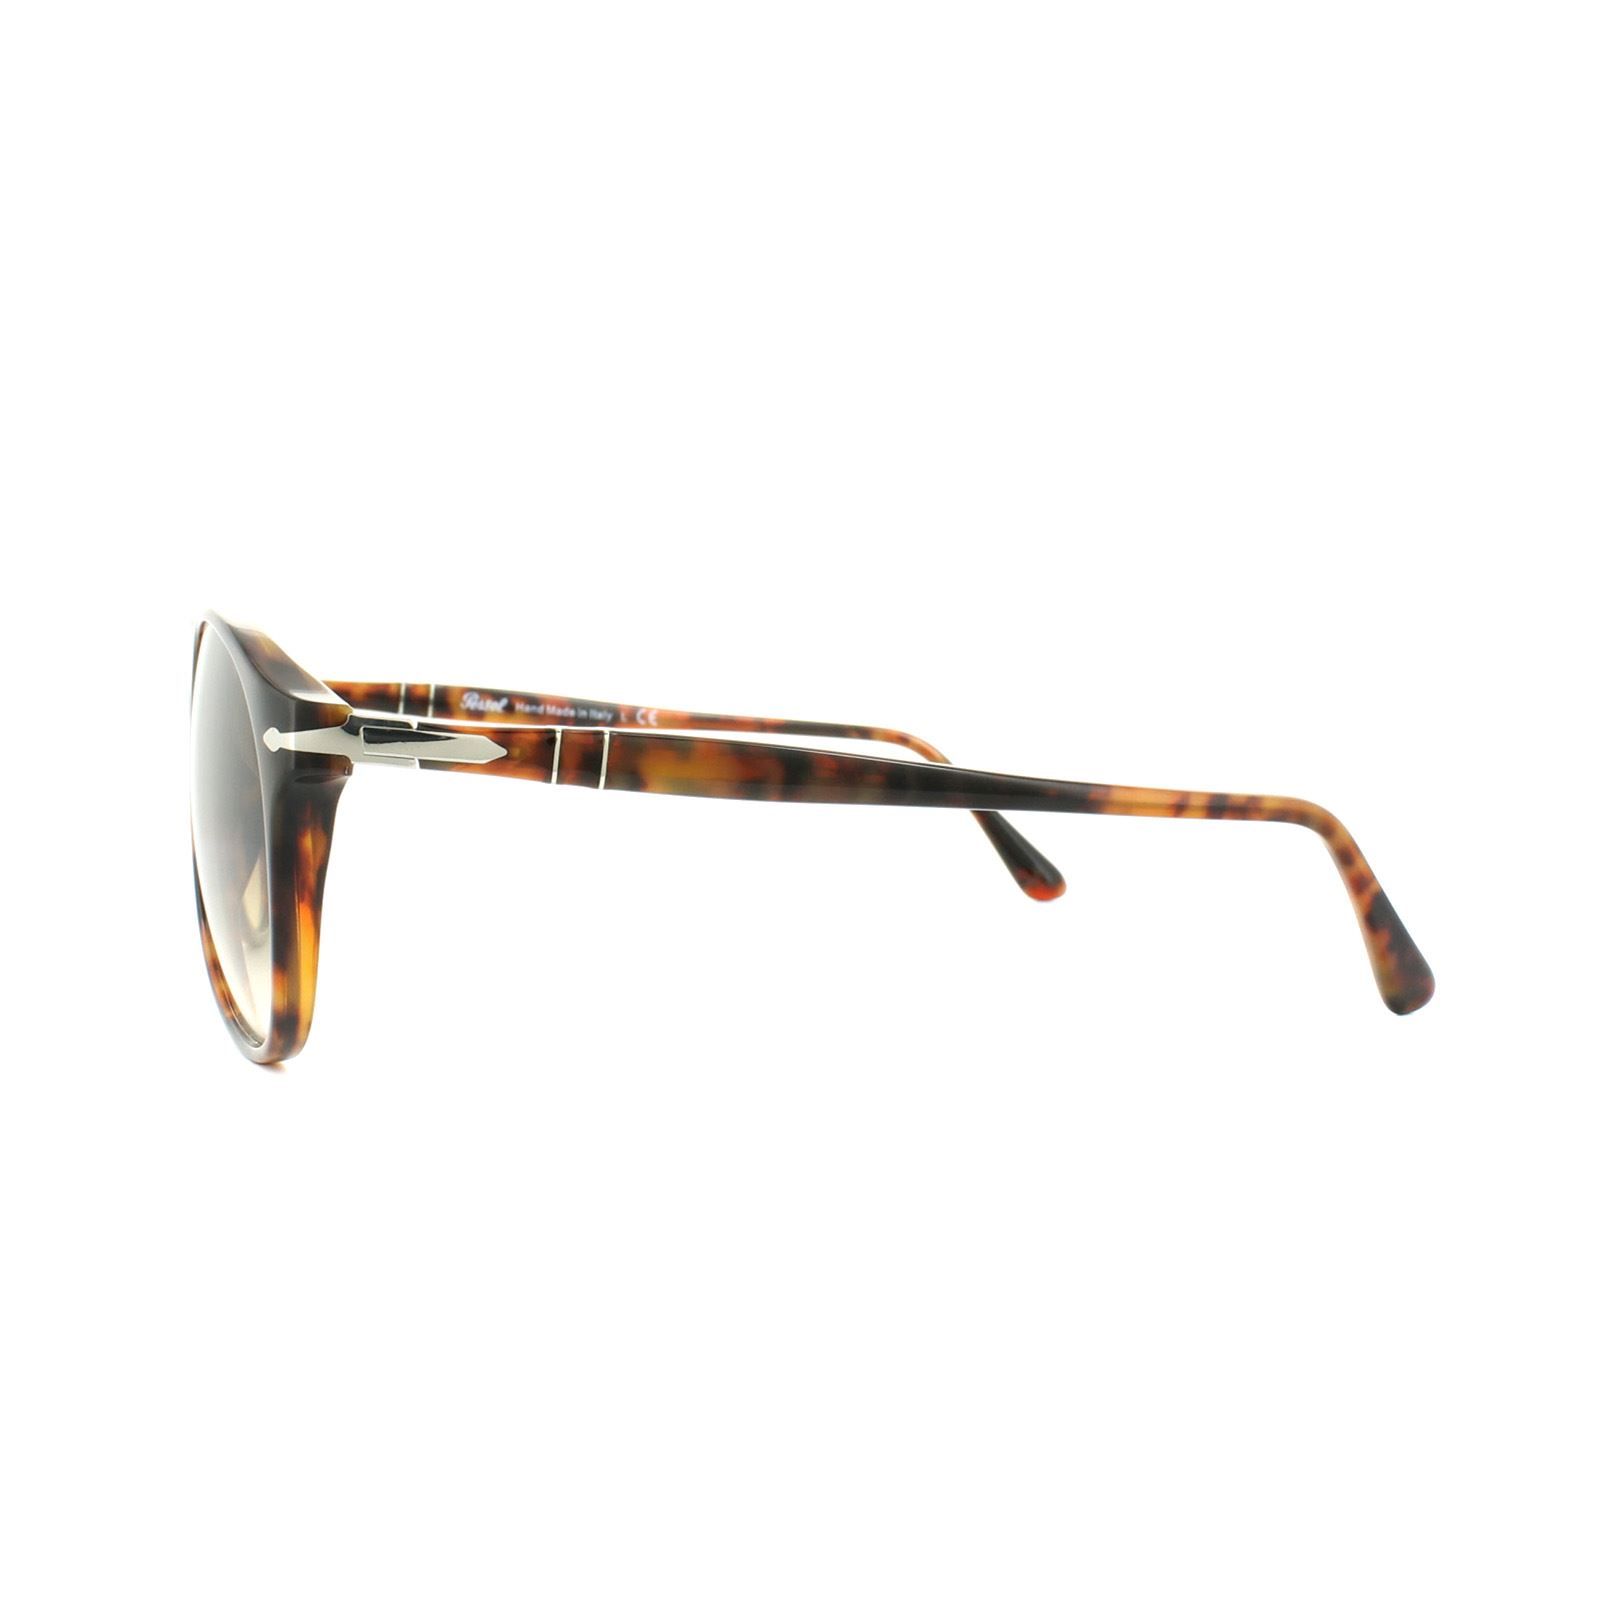 Persol Sunglasses 6649S 108/51 Caffe Brown Brown Gradient is a another updated version of the classic 649 model with a meflecto flex system on the hinge and at the bridge for a very flexible, thus comfortable fit, perfect for all day wear.